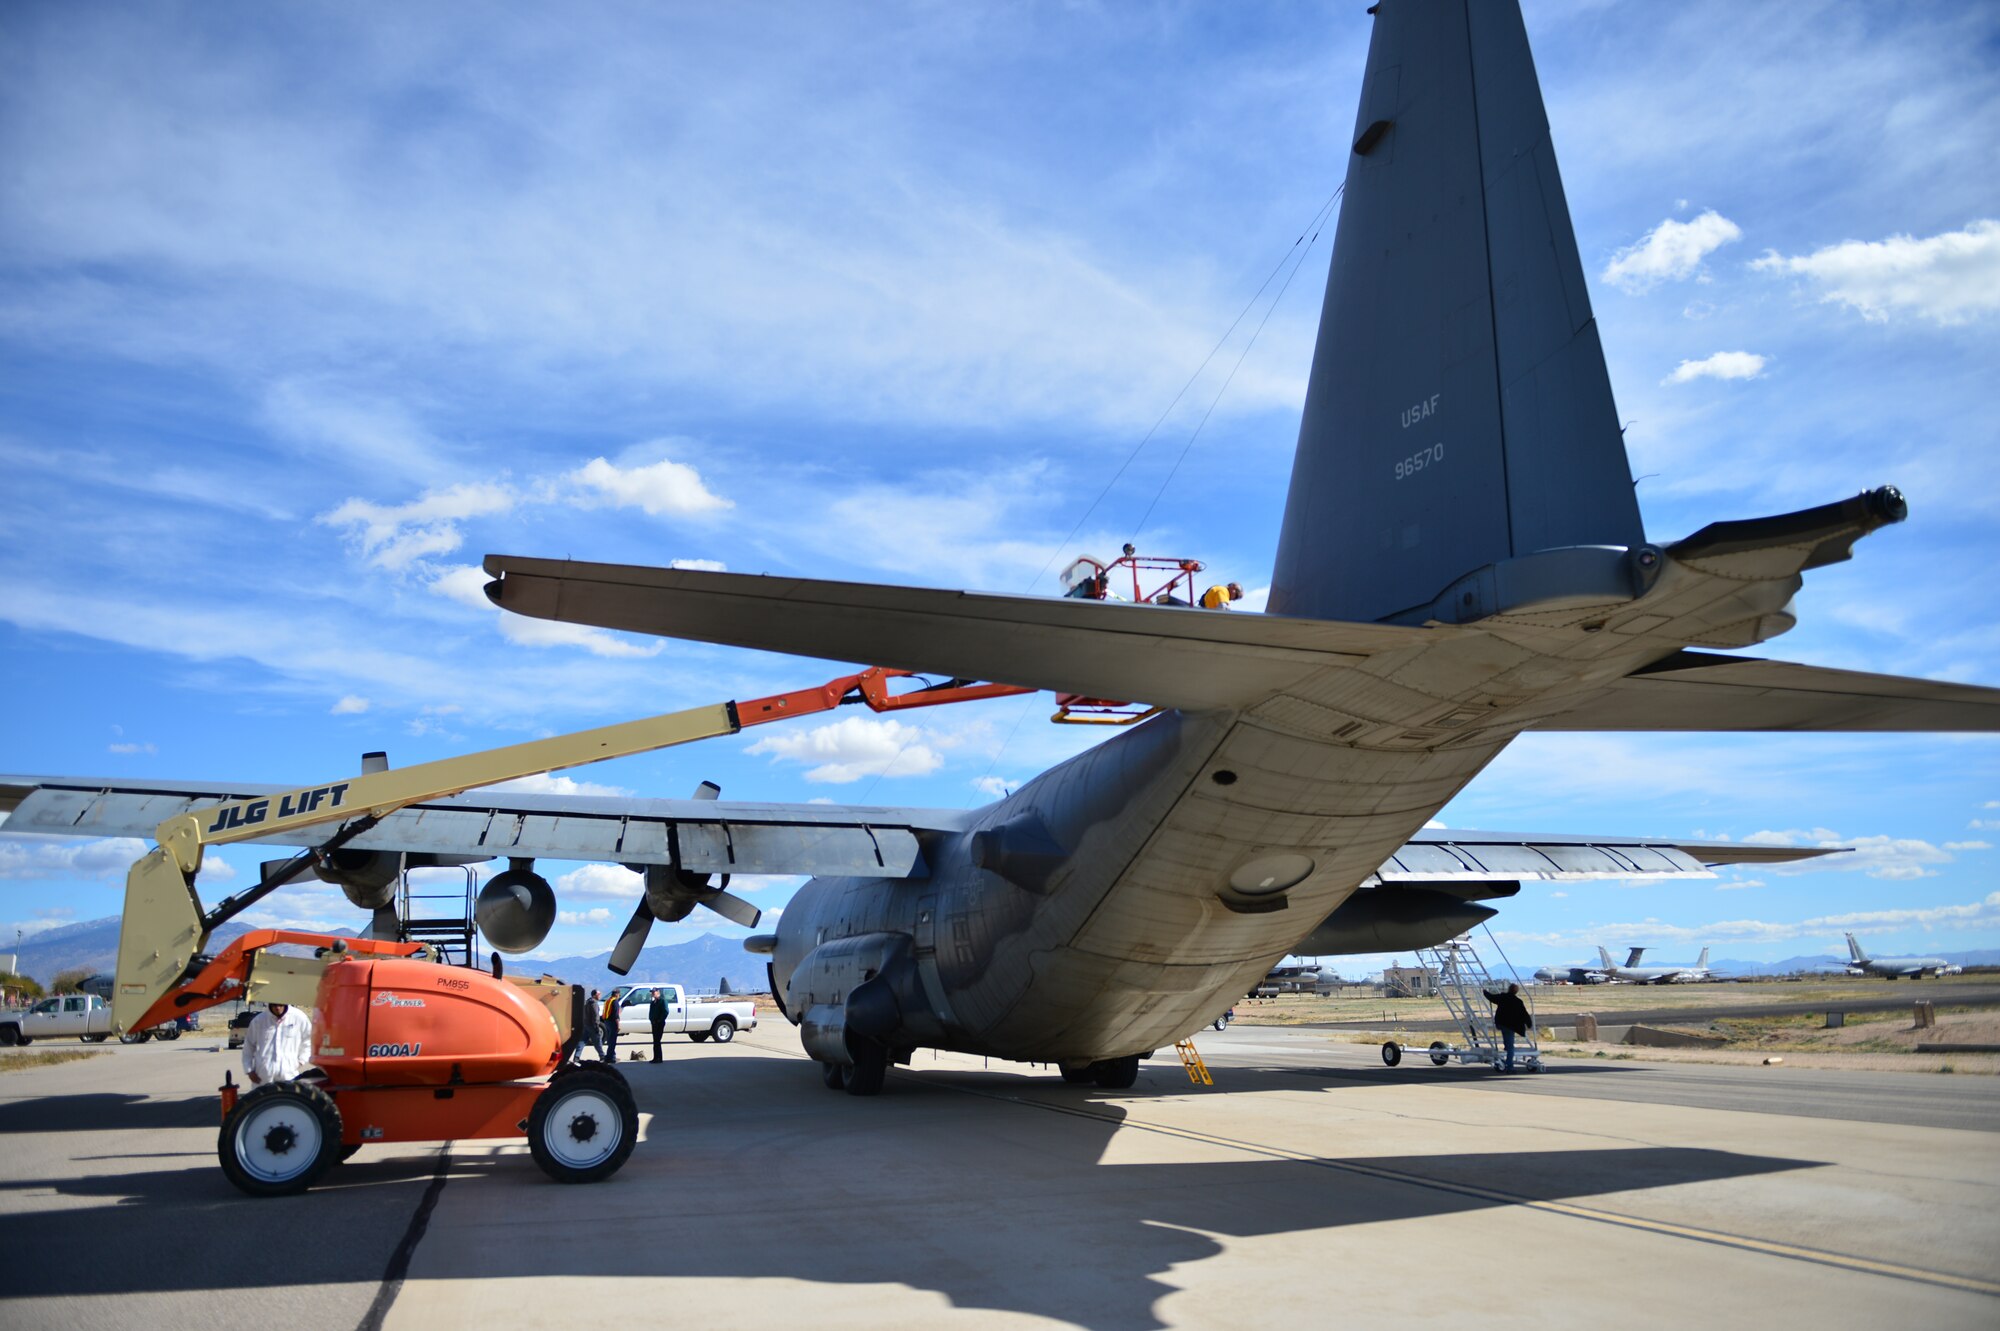 Personnel from the 309th Aerospace Maintenance and Regeneration Group begin prepping the AC-130H Spectre gunship "Bad Company" for transport to the boneyard at Davis-Monthan Air Force Base, Ariz., Feb. 7, 2014. Bad Company will remain at the boneyard until it is either scrapped and used for parts or regenerated and put back into the air. (U.S. Air Force photo/ Senior Airman Eboni Reece)